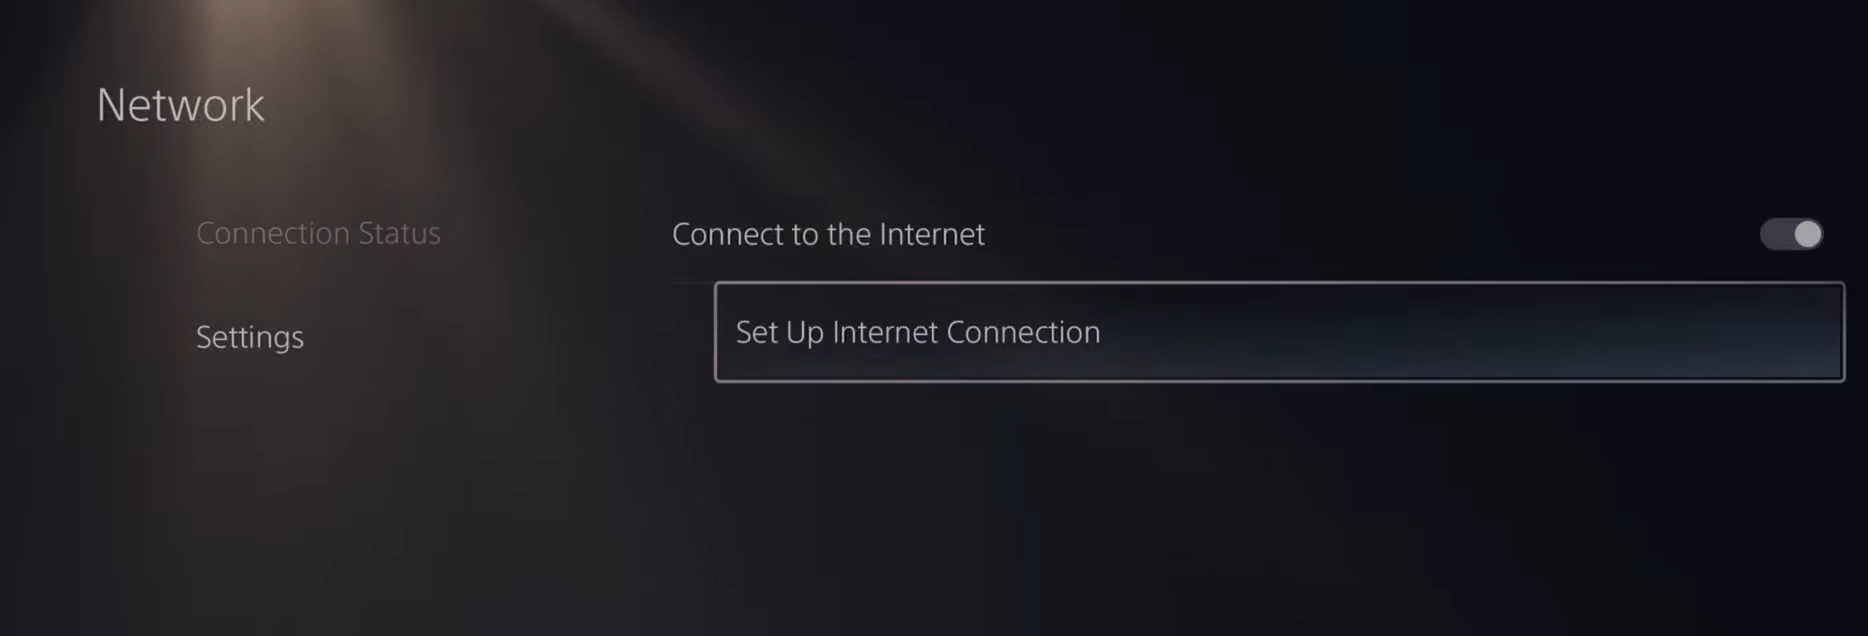 'Set Up Internet Connection' in PlayStation's Network settings.